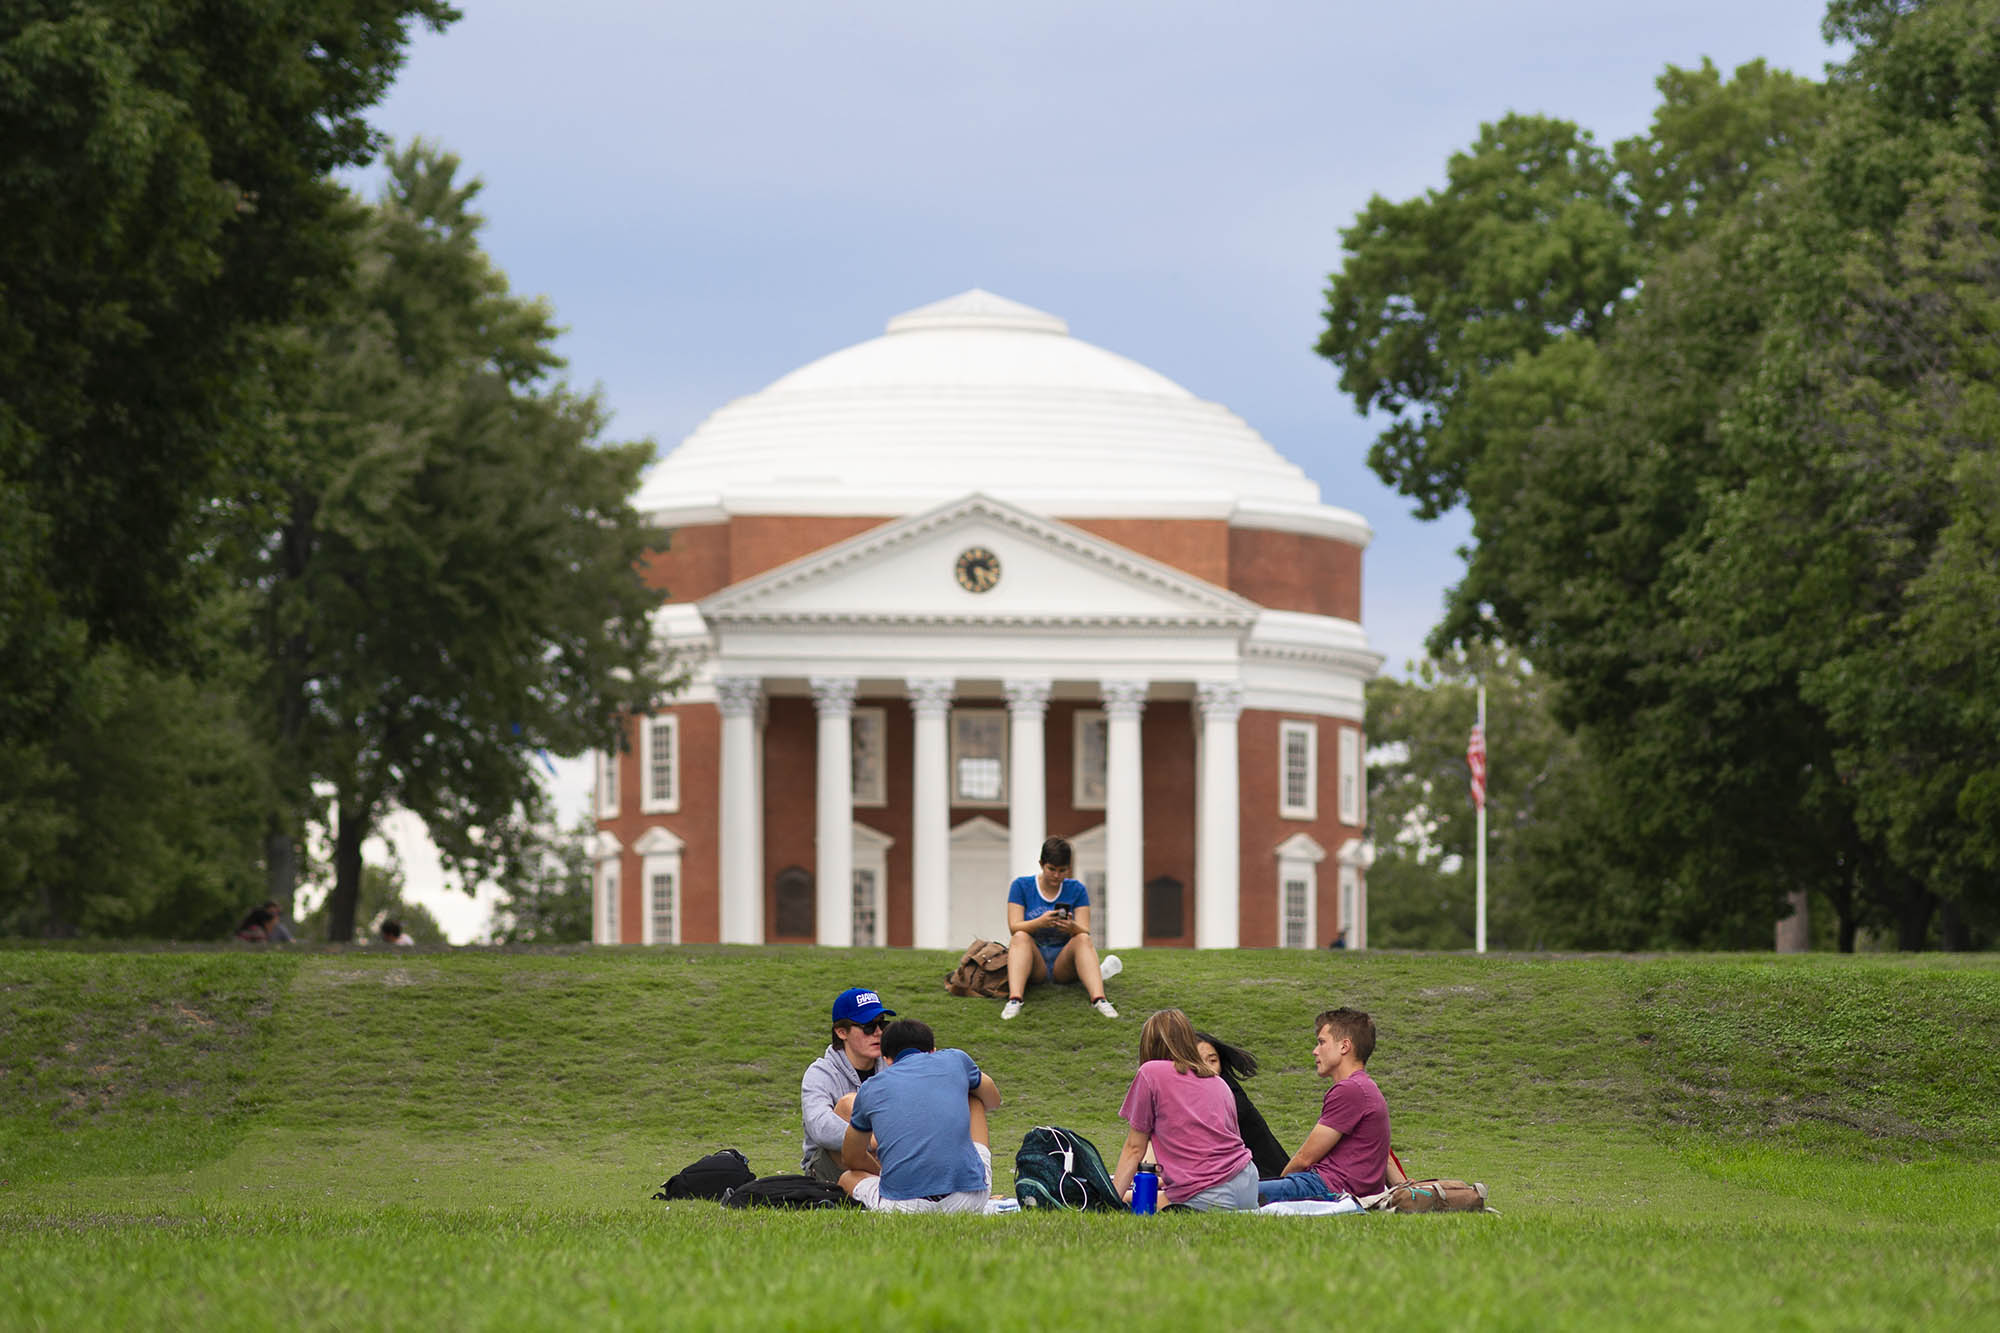 Students sitting on the grass in front of the Rotunda